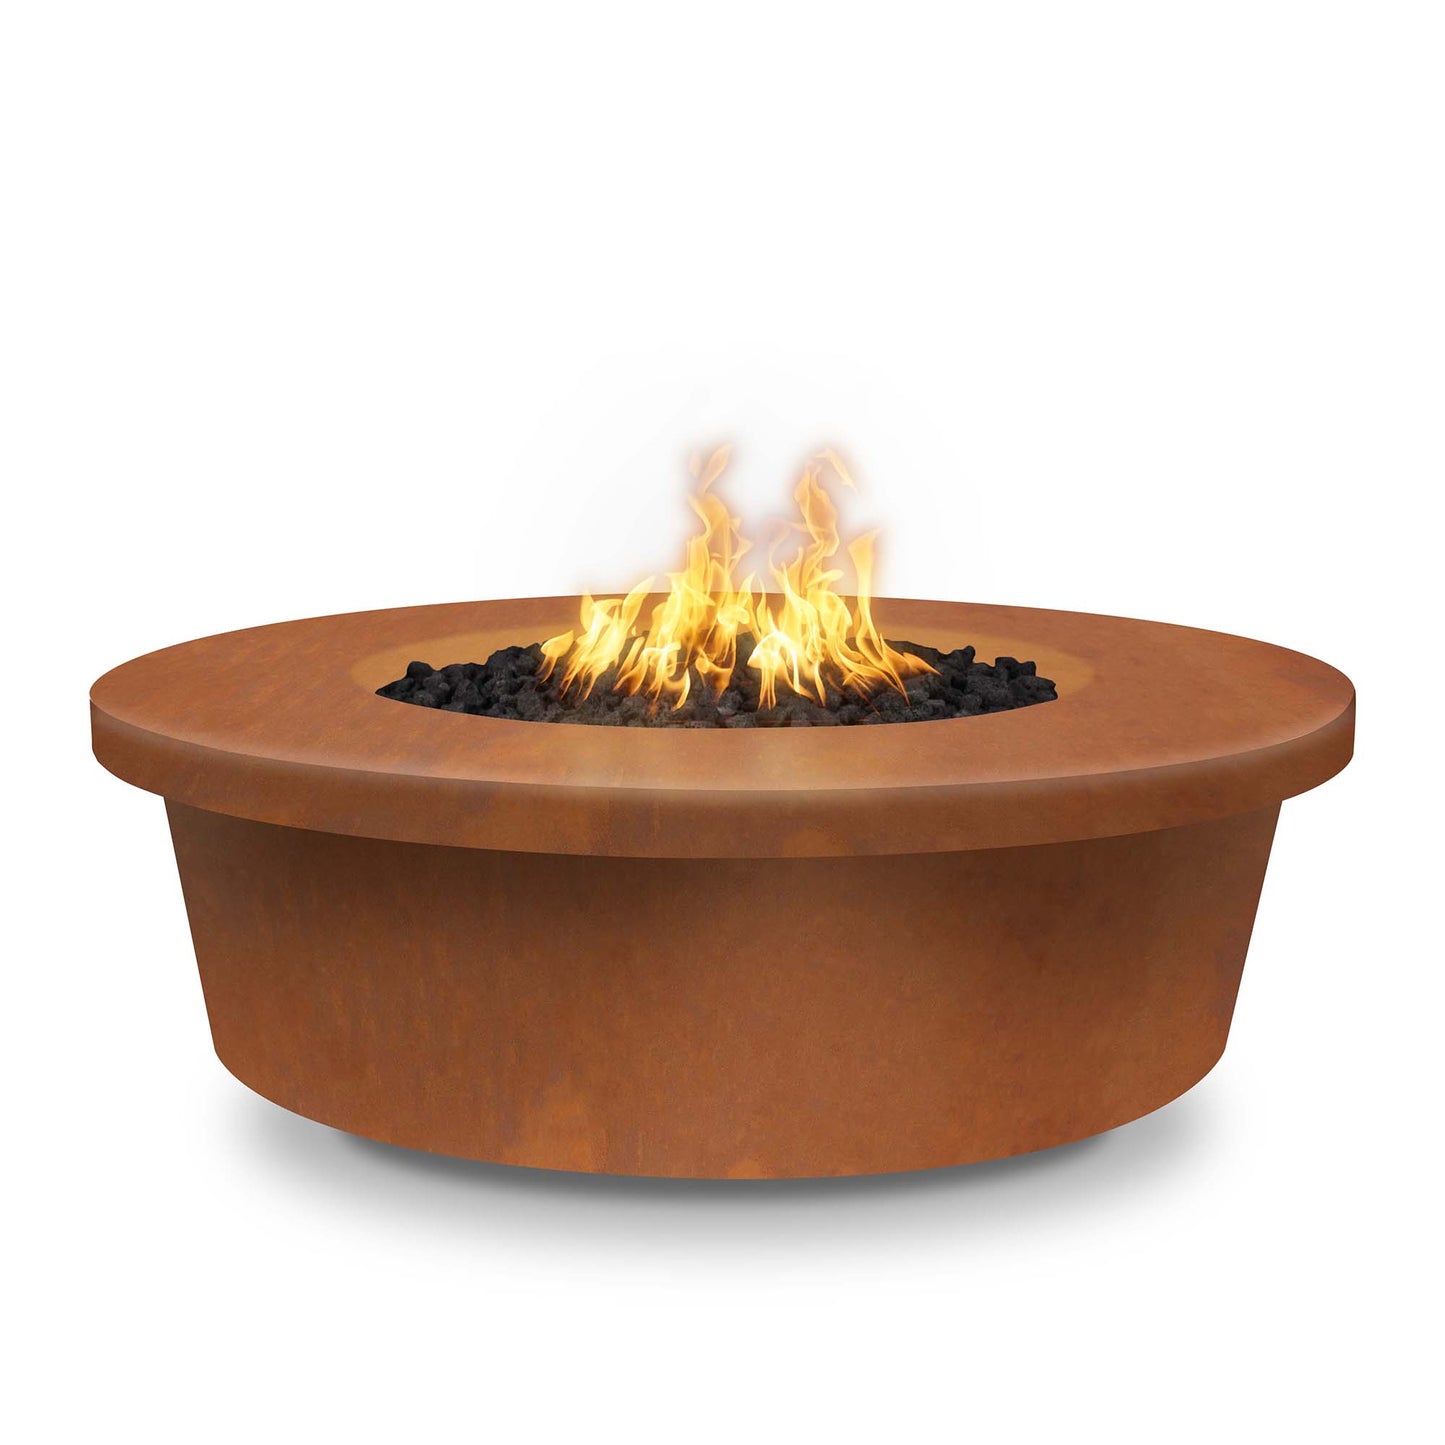 The Outdoor Plus Round Tempe 48" Hammered Copper Liquid Propane Fire Pit with 110V Electronic Ignition